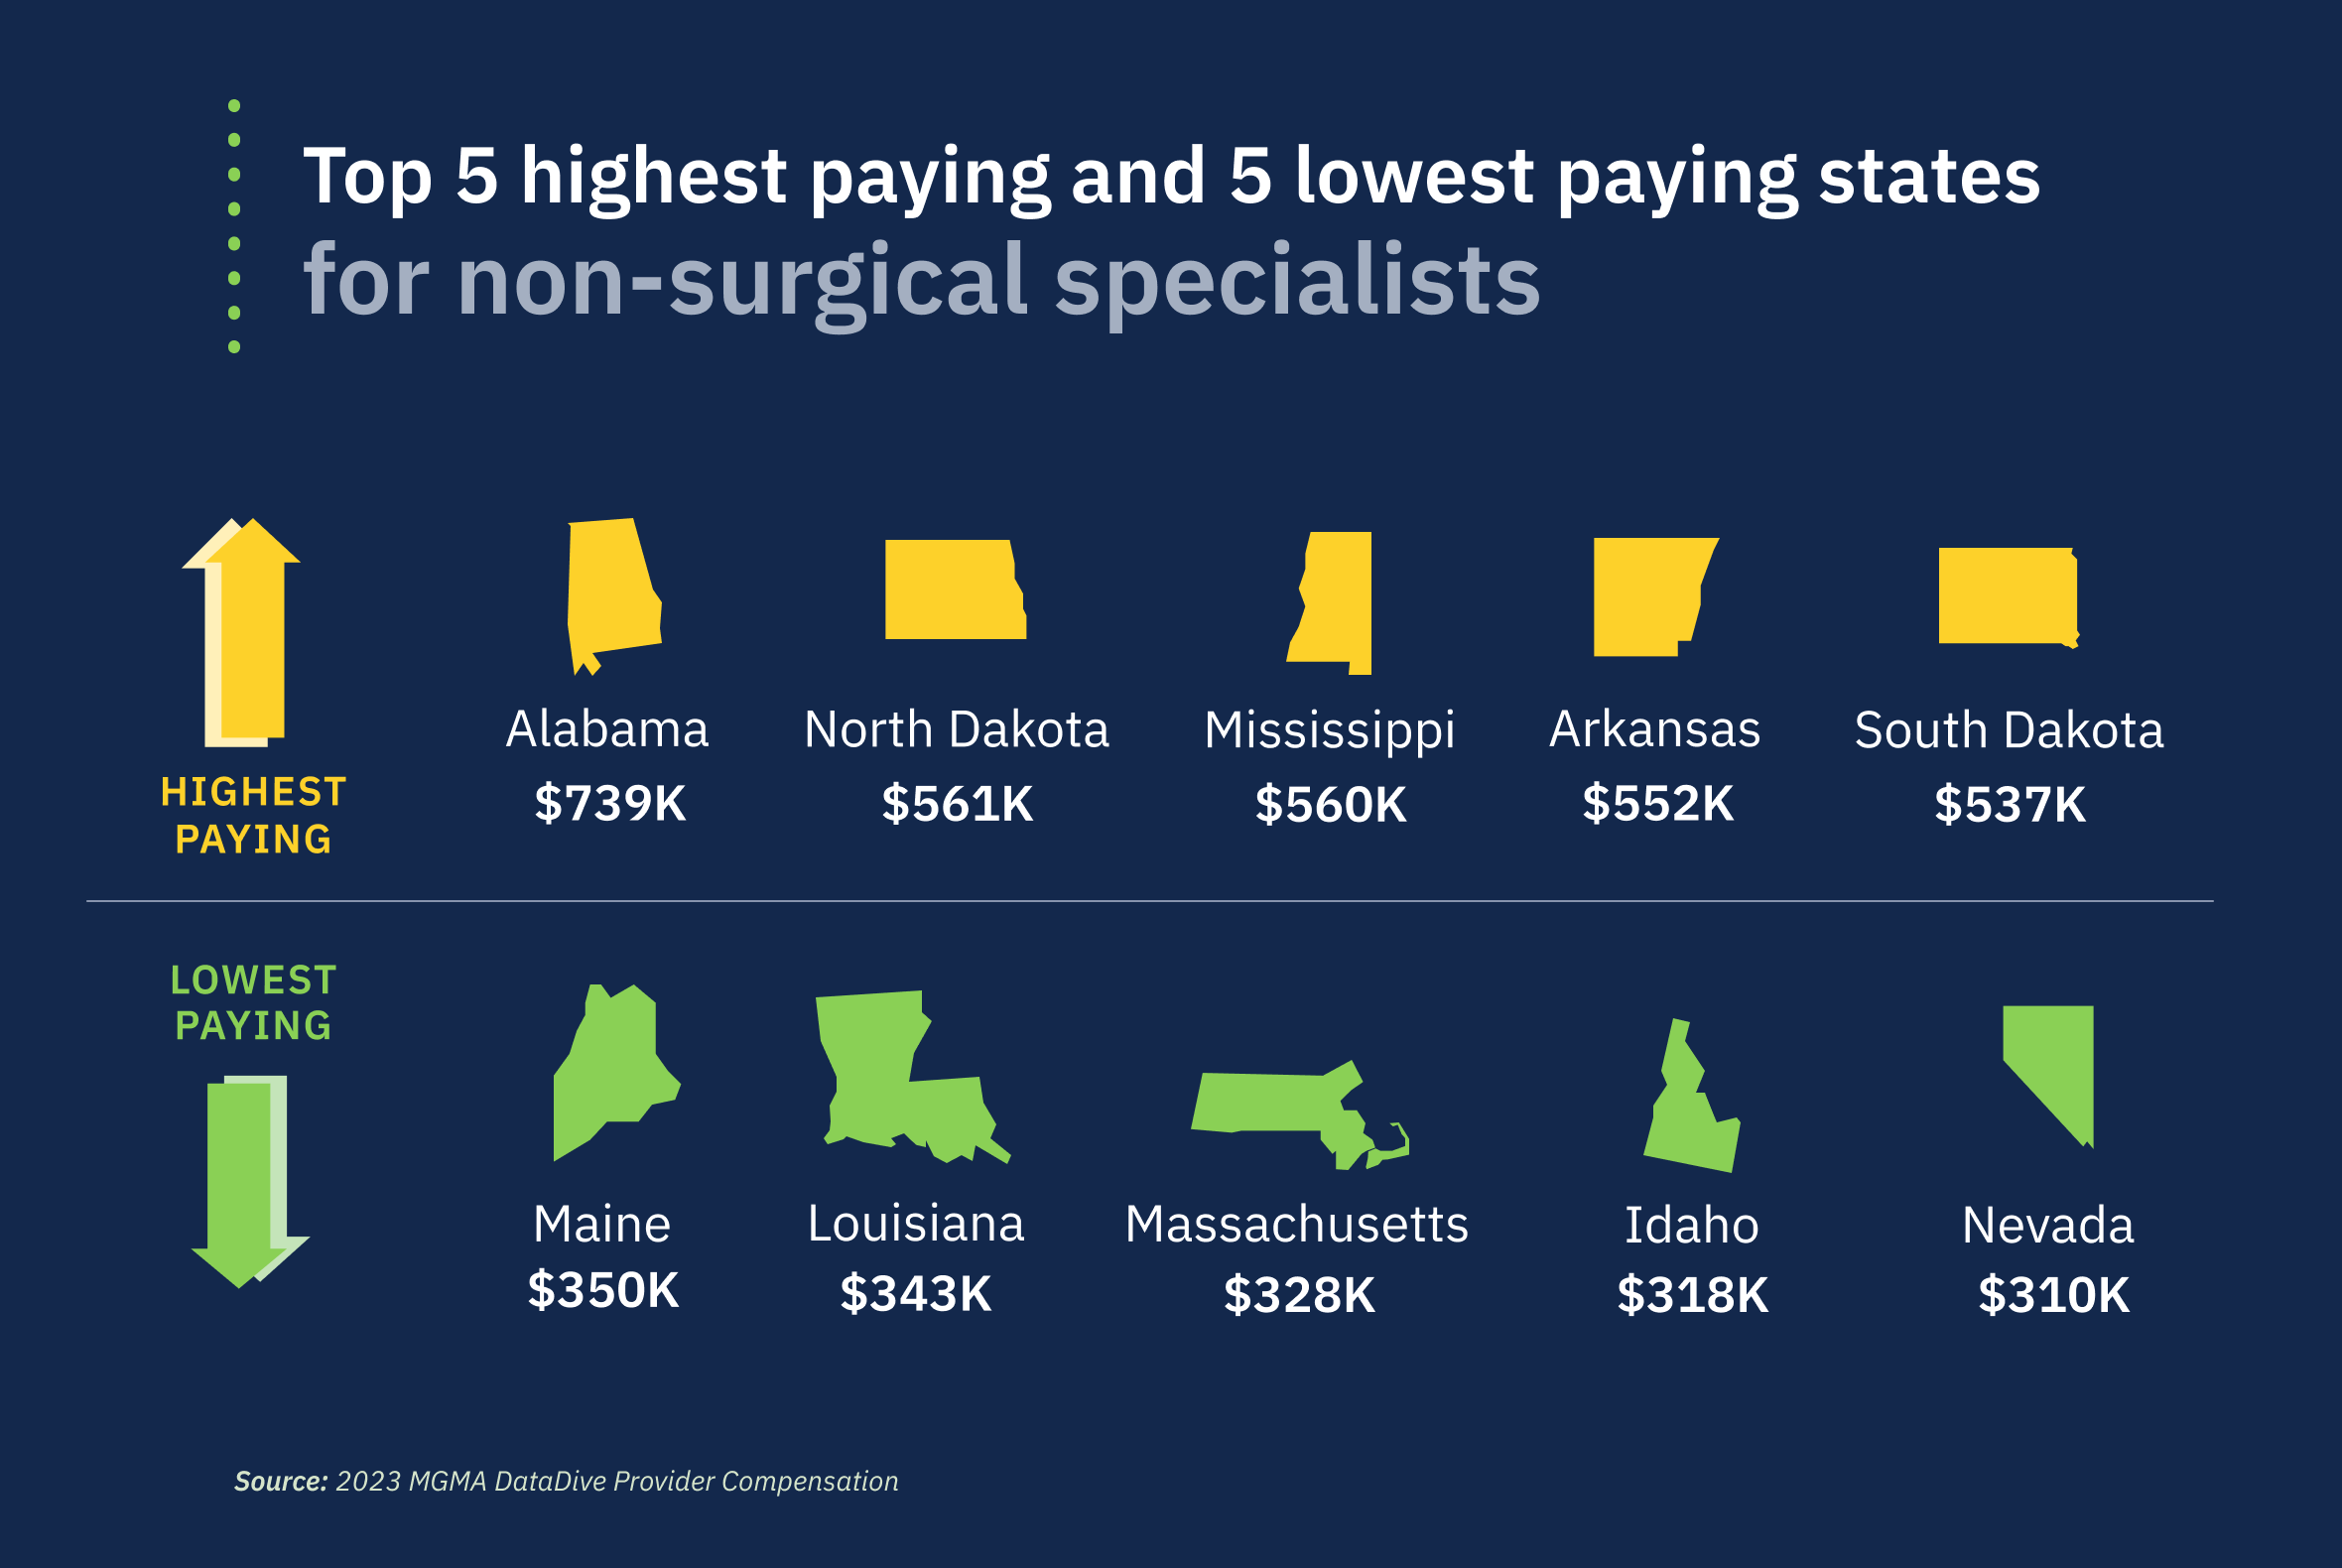 Map 3: Top 5 highest and lowest paying states for non-surgical specialties